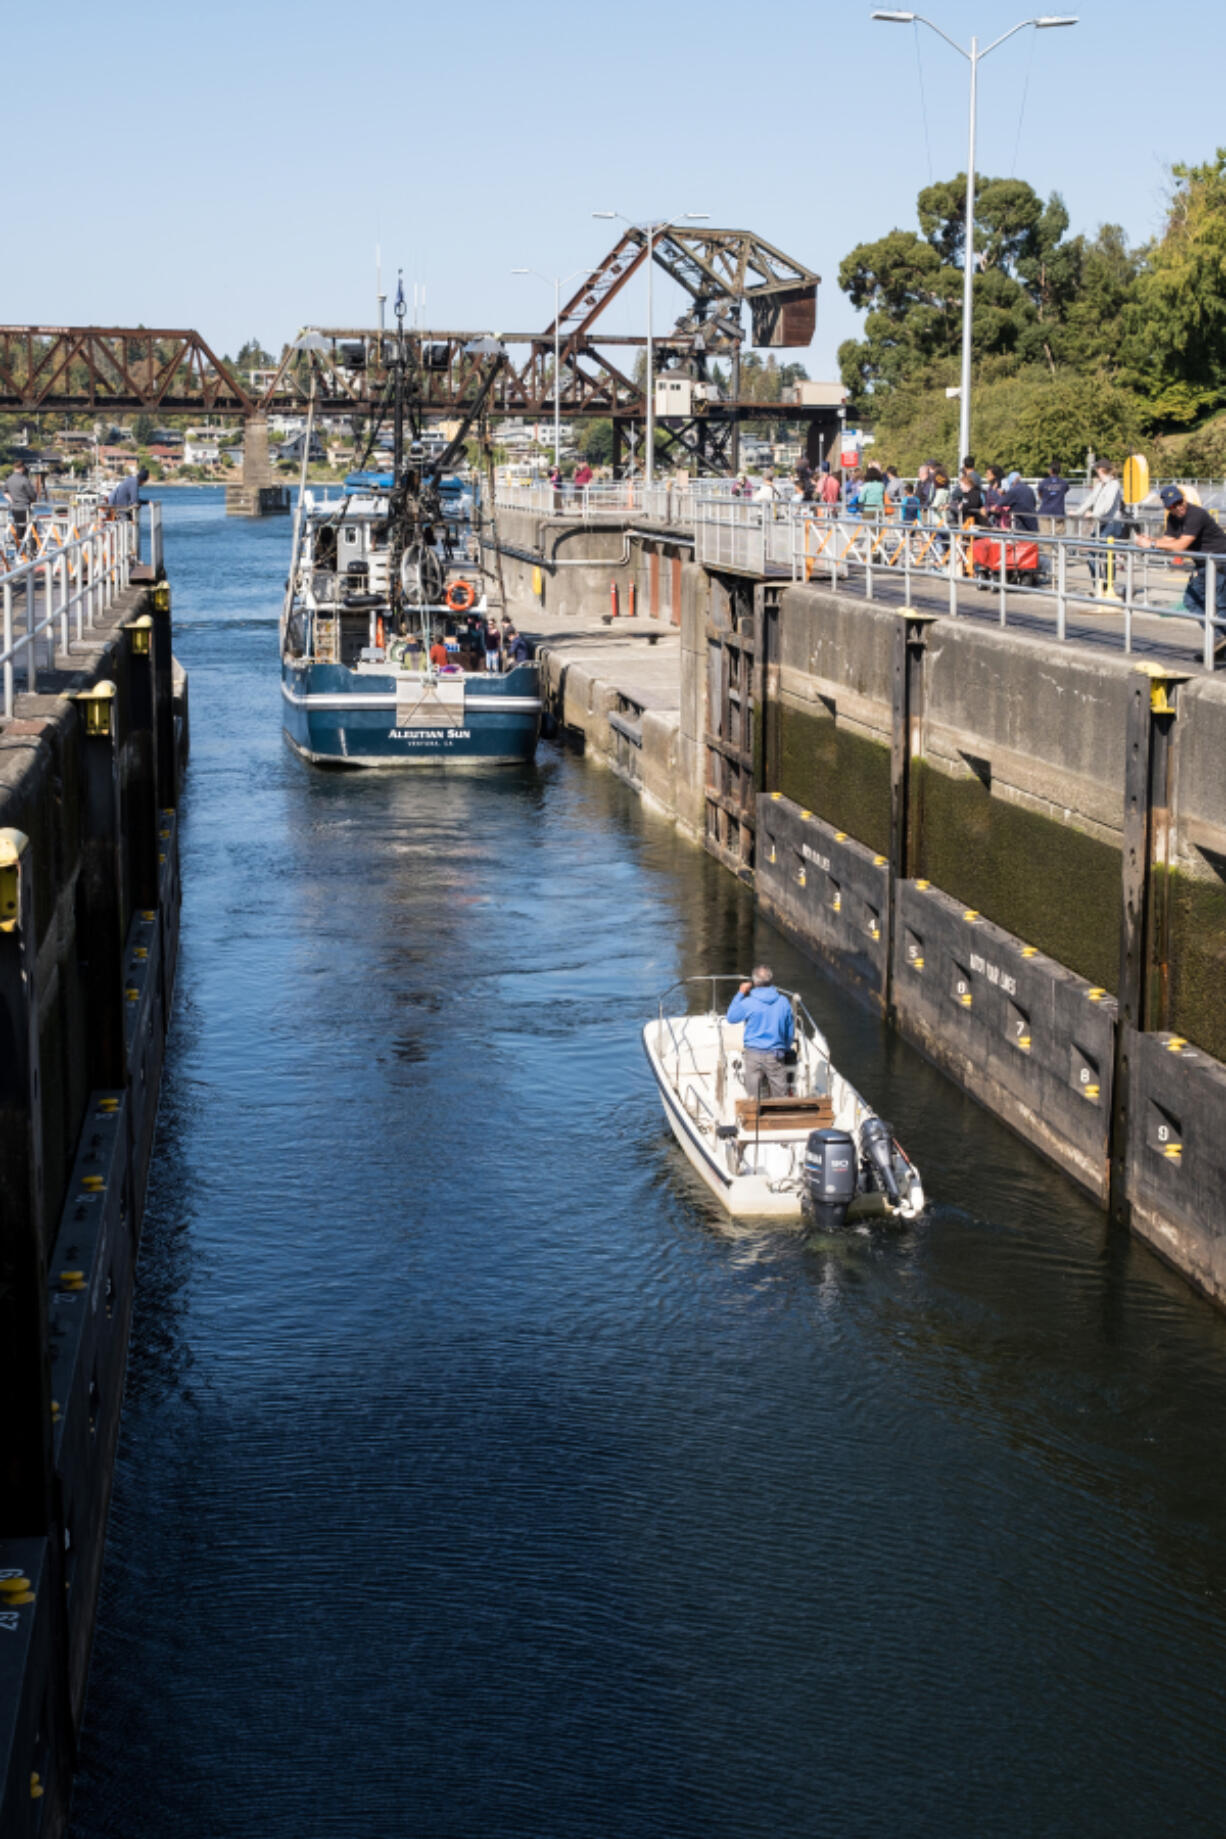 Boats pass through the locks in Ballard as visitors watch Sept. 18, 2022. Formally opened in 1917, the Ballard Locks are the nation's busiest, passing up to 50,000 vessels each year.